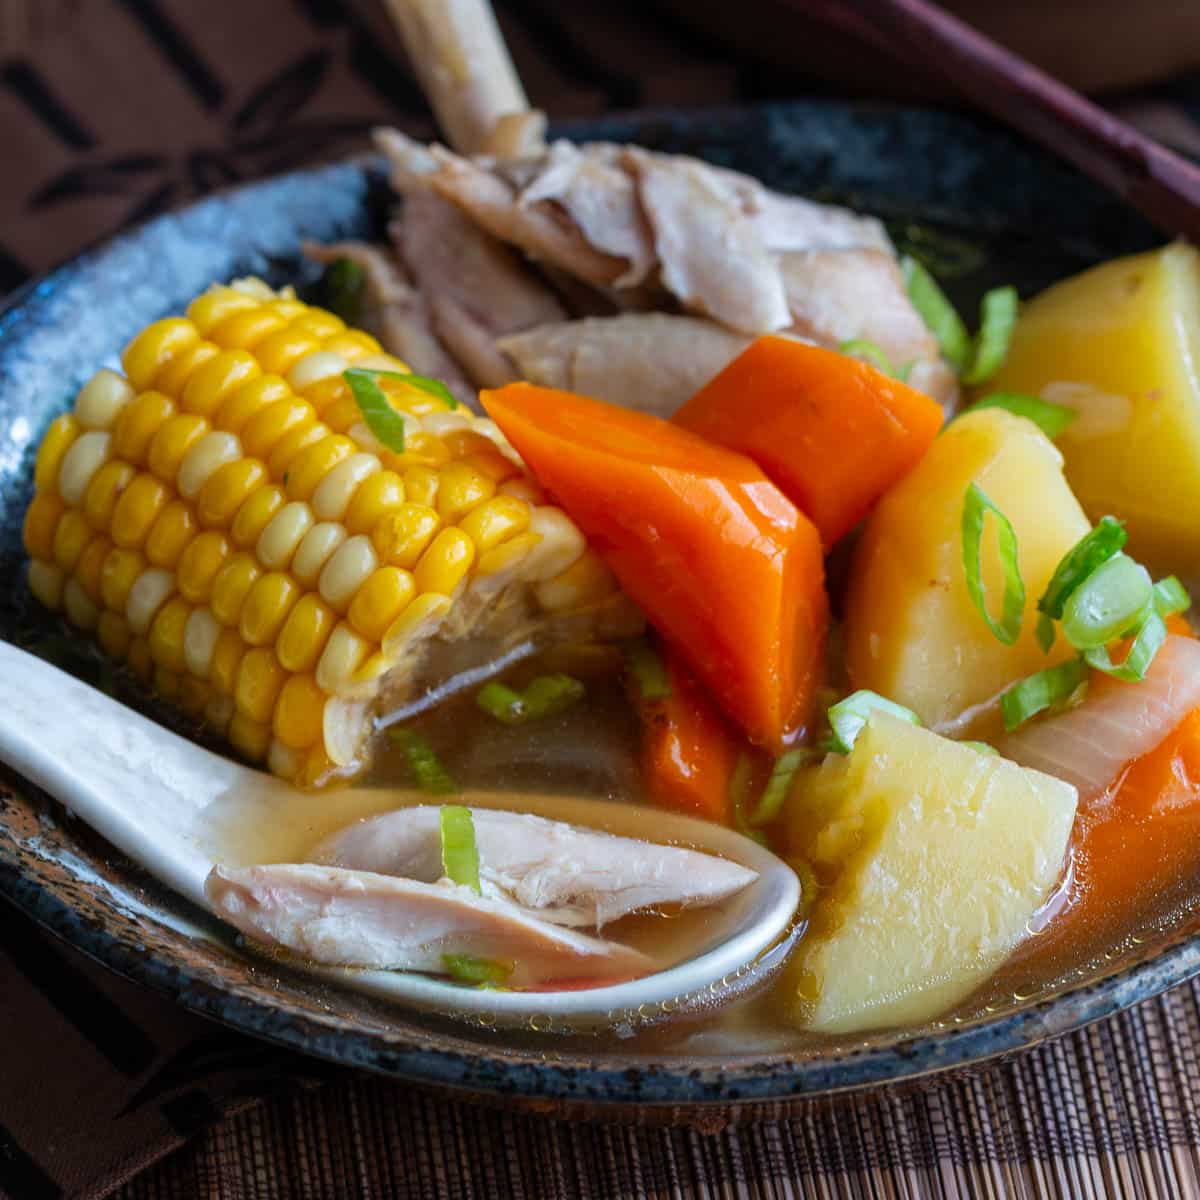 Showing a Chinese spoonful of clear ABC soup broth with tender chicken with the vegetables in a black bowl.